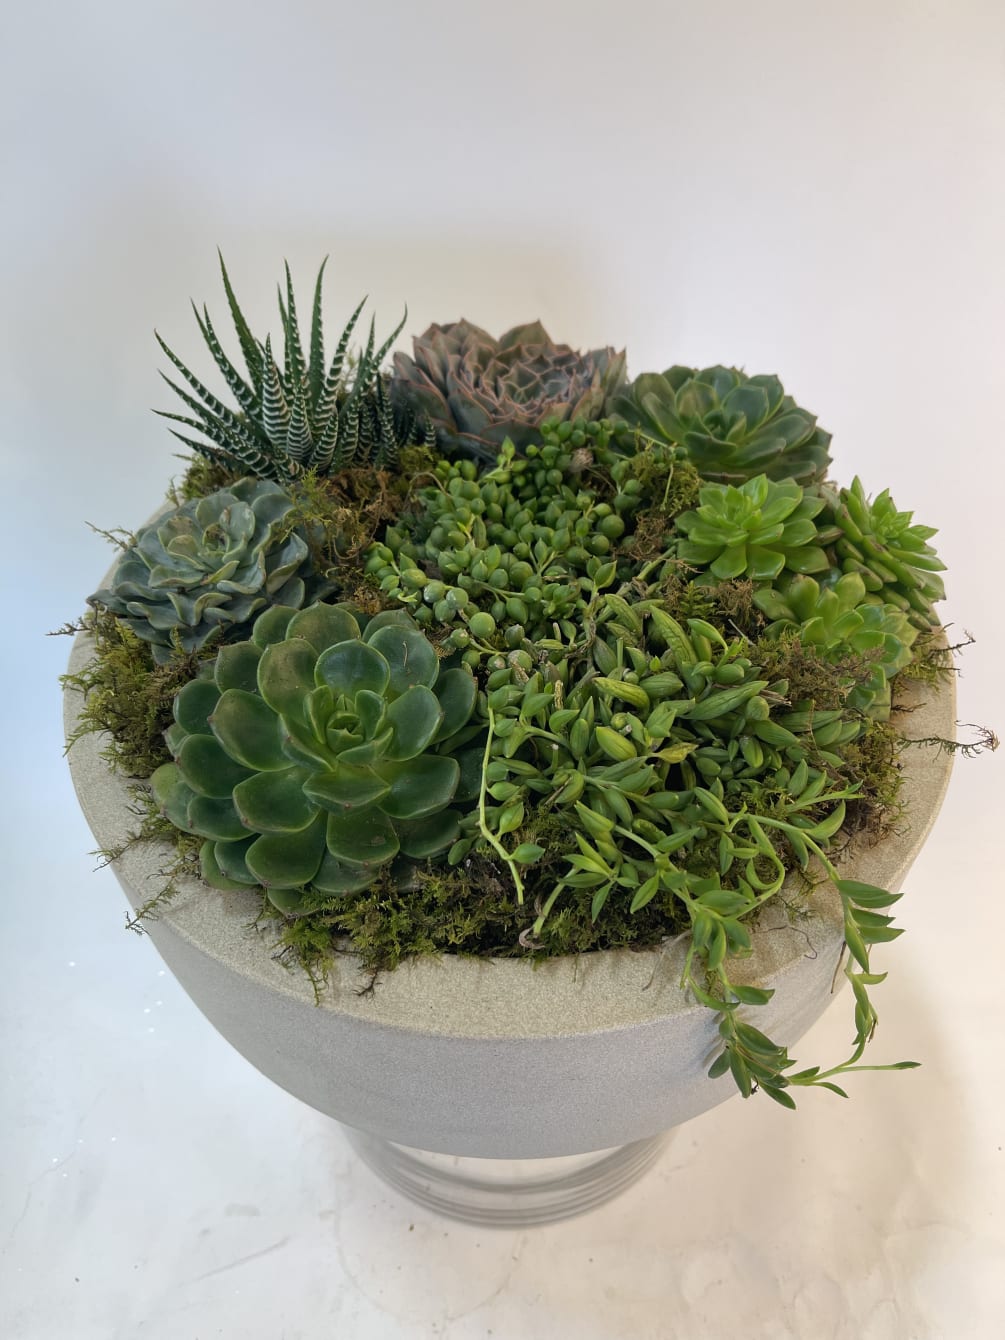 This oversized low succulent garden is filled with a mixed variety of